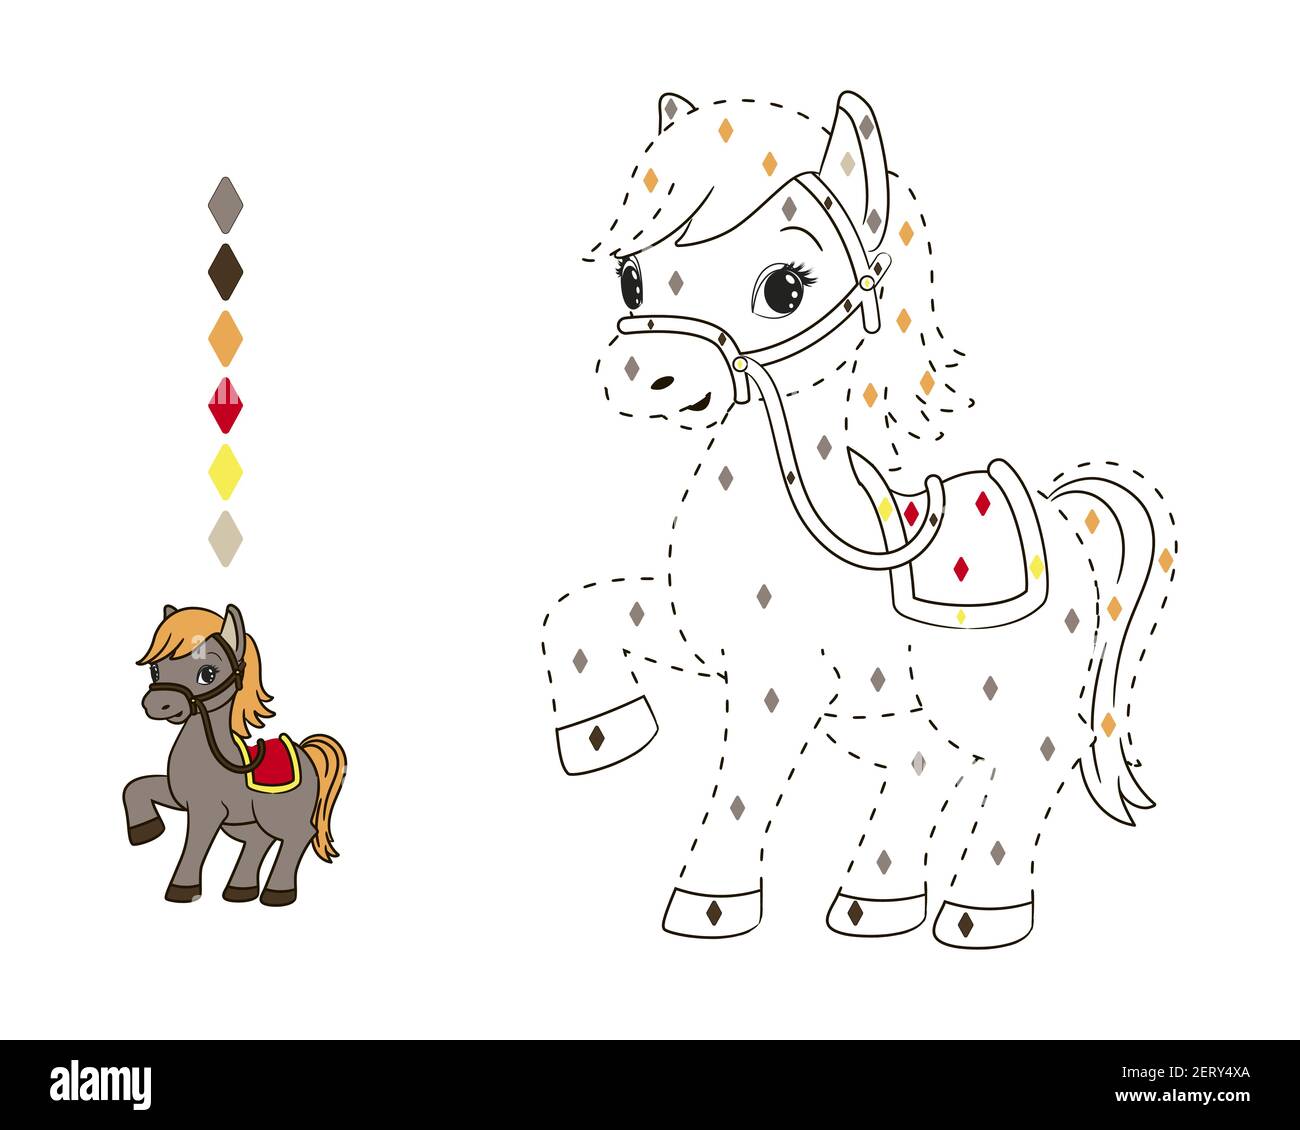 coloring by numbers for kids, little horse with orange mane.Vector illustration in cartoon style, dotted line Stock Vector